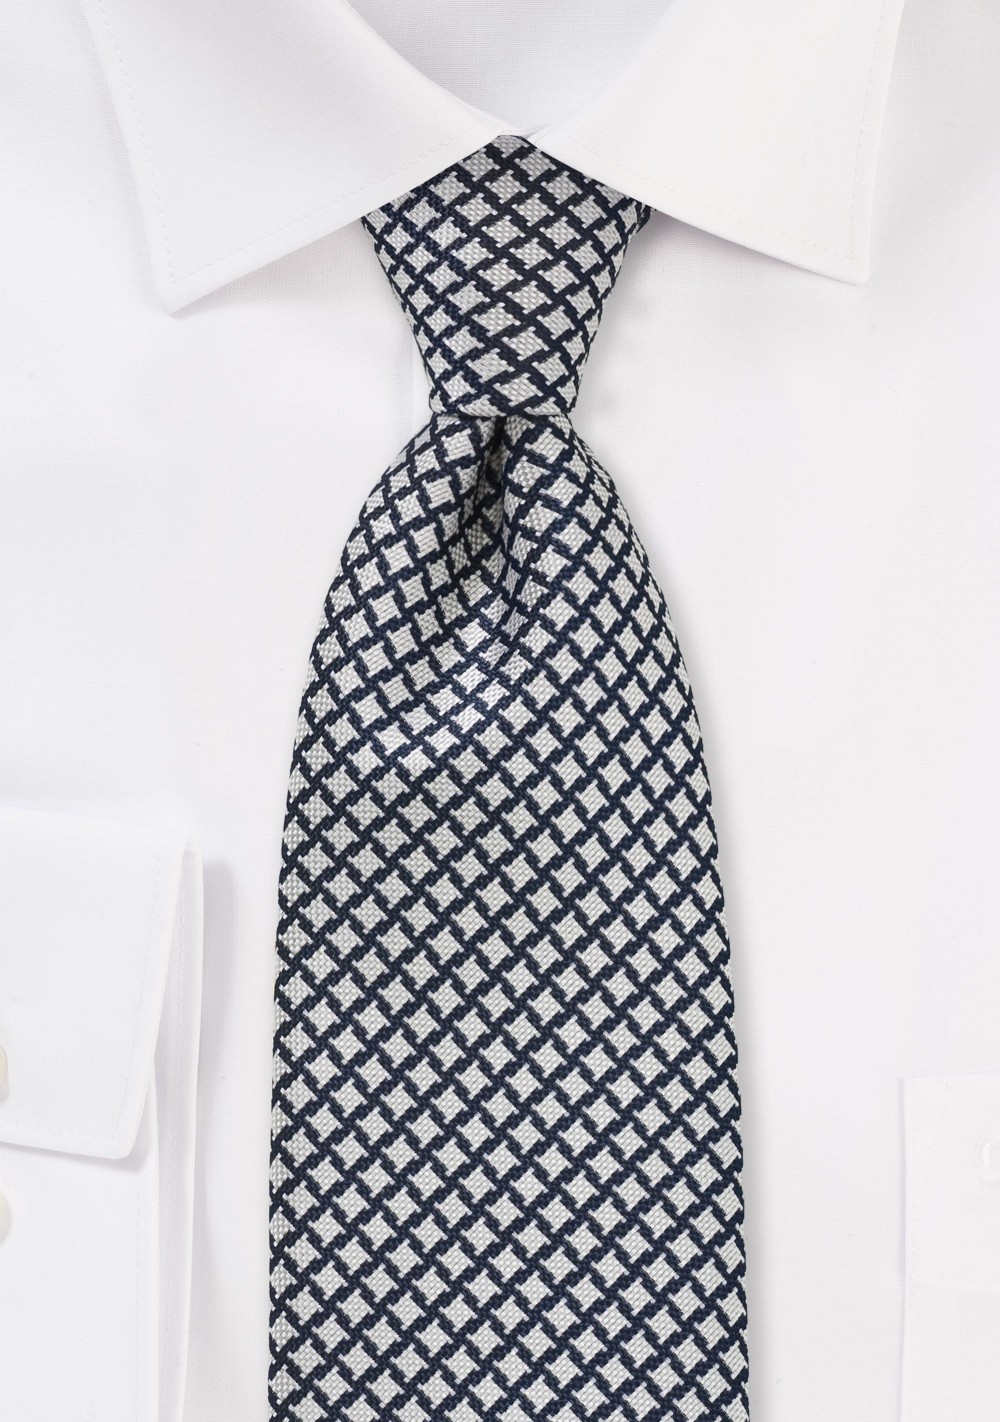 Dark Blue and Silver Houndstooth Check Tie